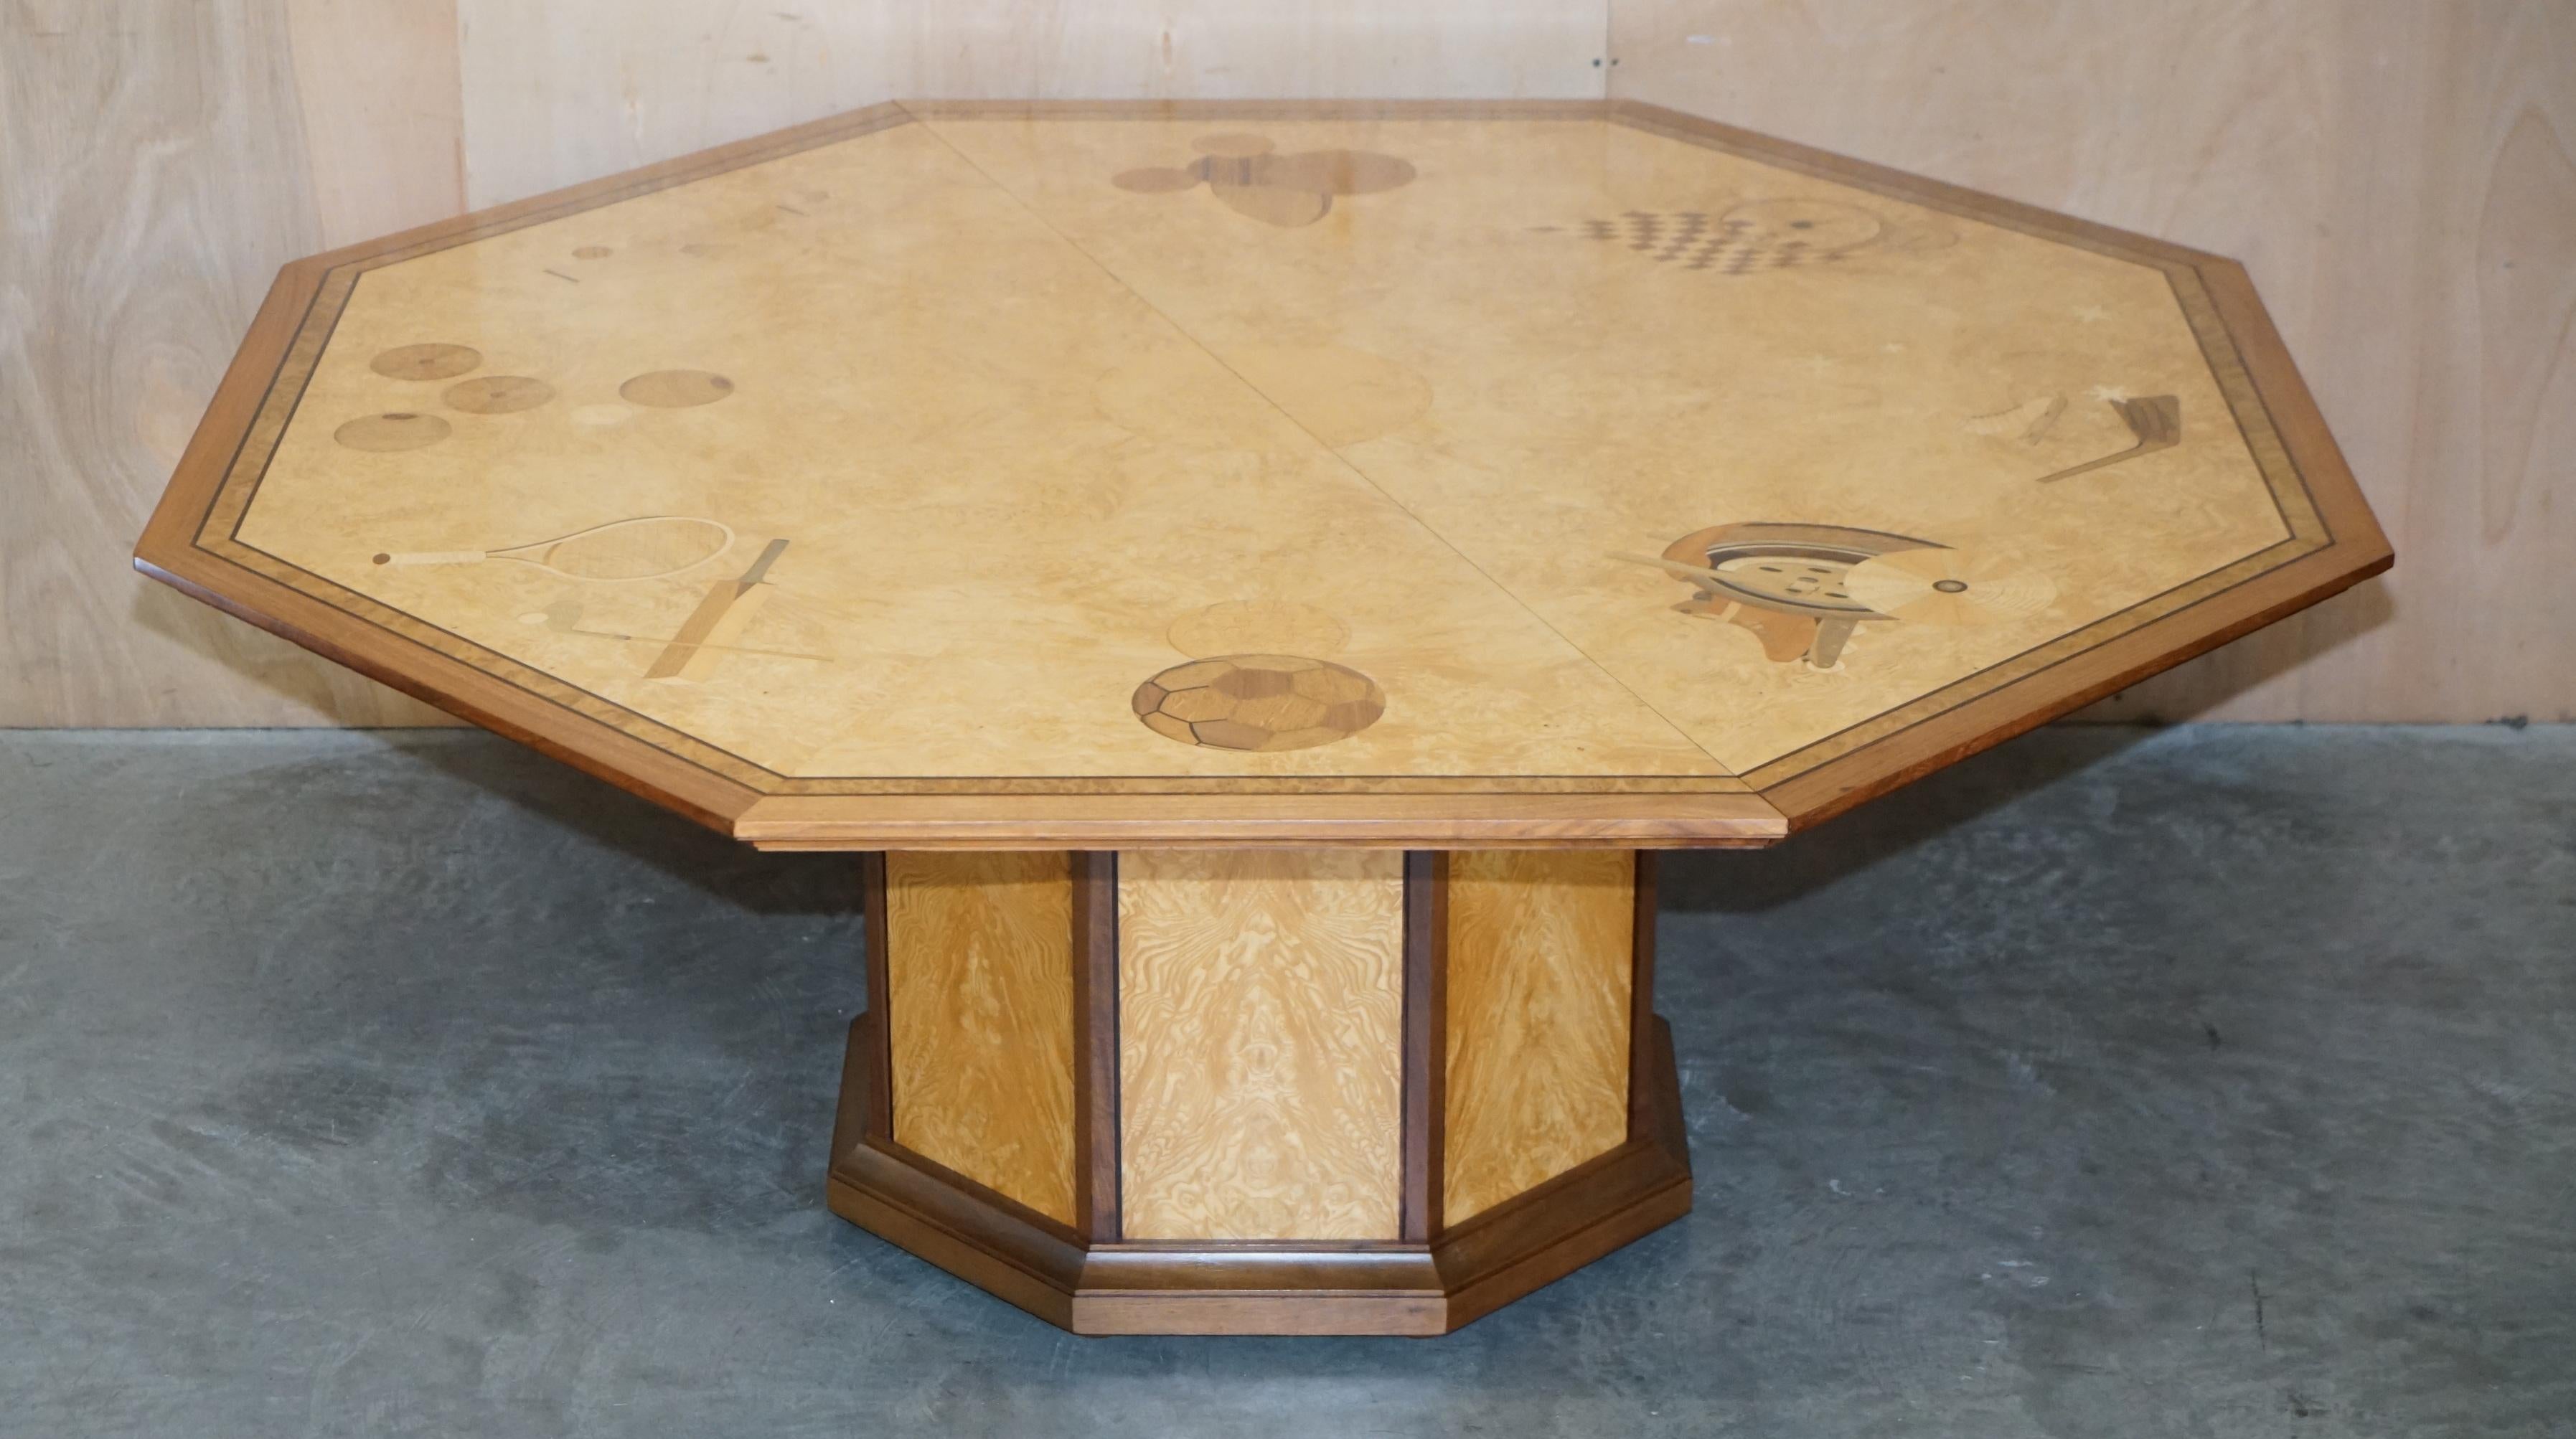 Royal House Antiques

Royal House Antiques is delighted to offer for sale this stunning perfect condition David Linley boardroom or dining table to seat eight people RRP £65,000+

Please note the delivery fee listed is just a guide, it covers within